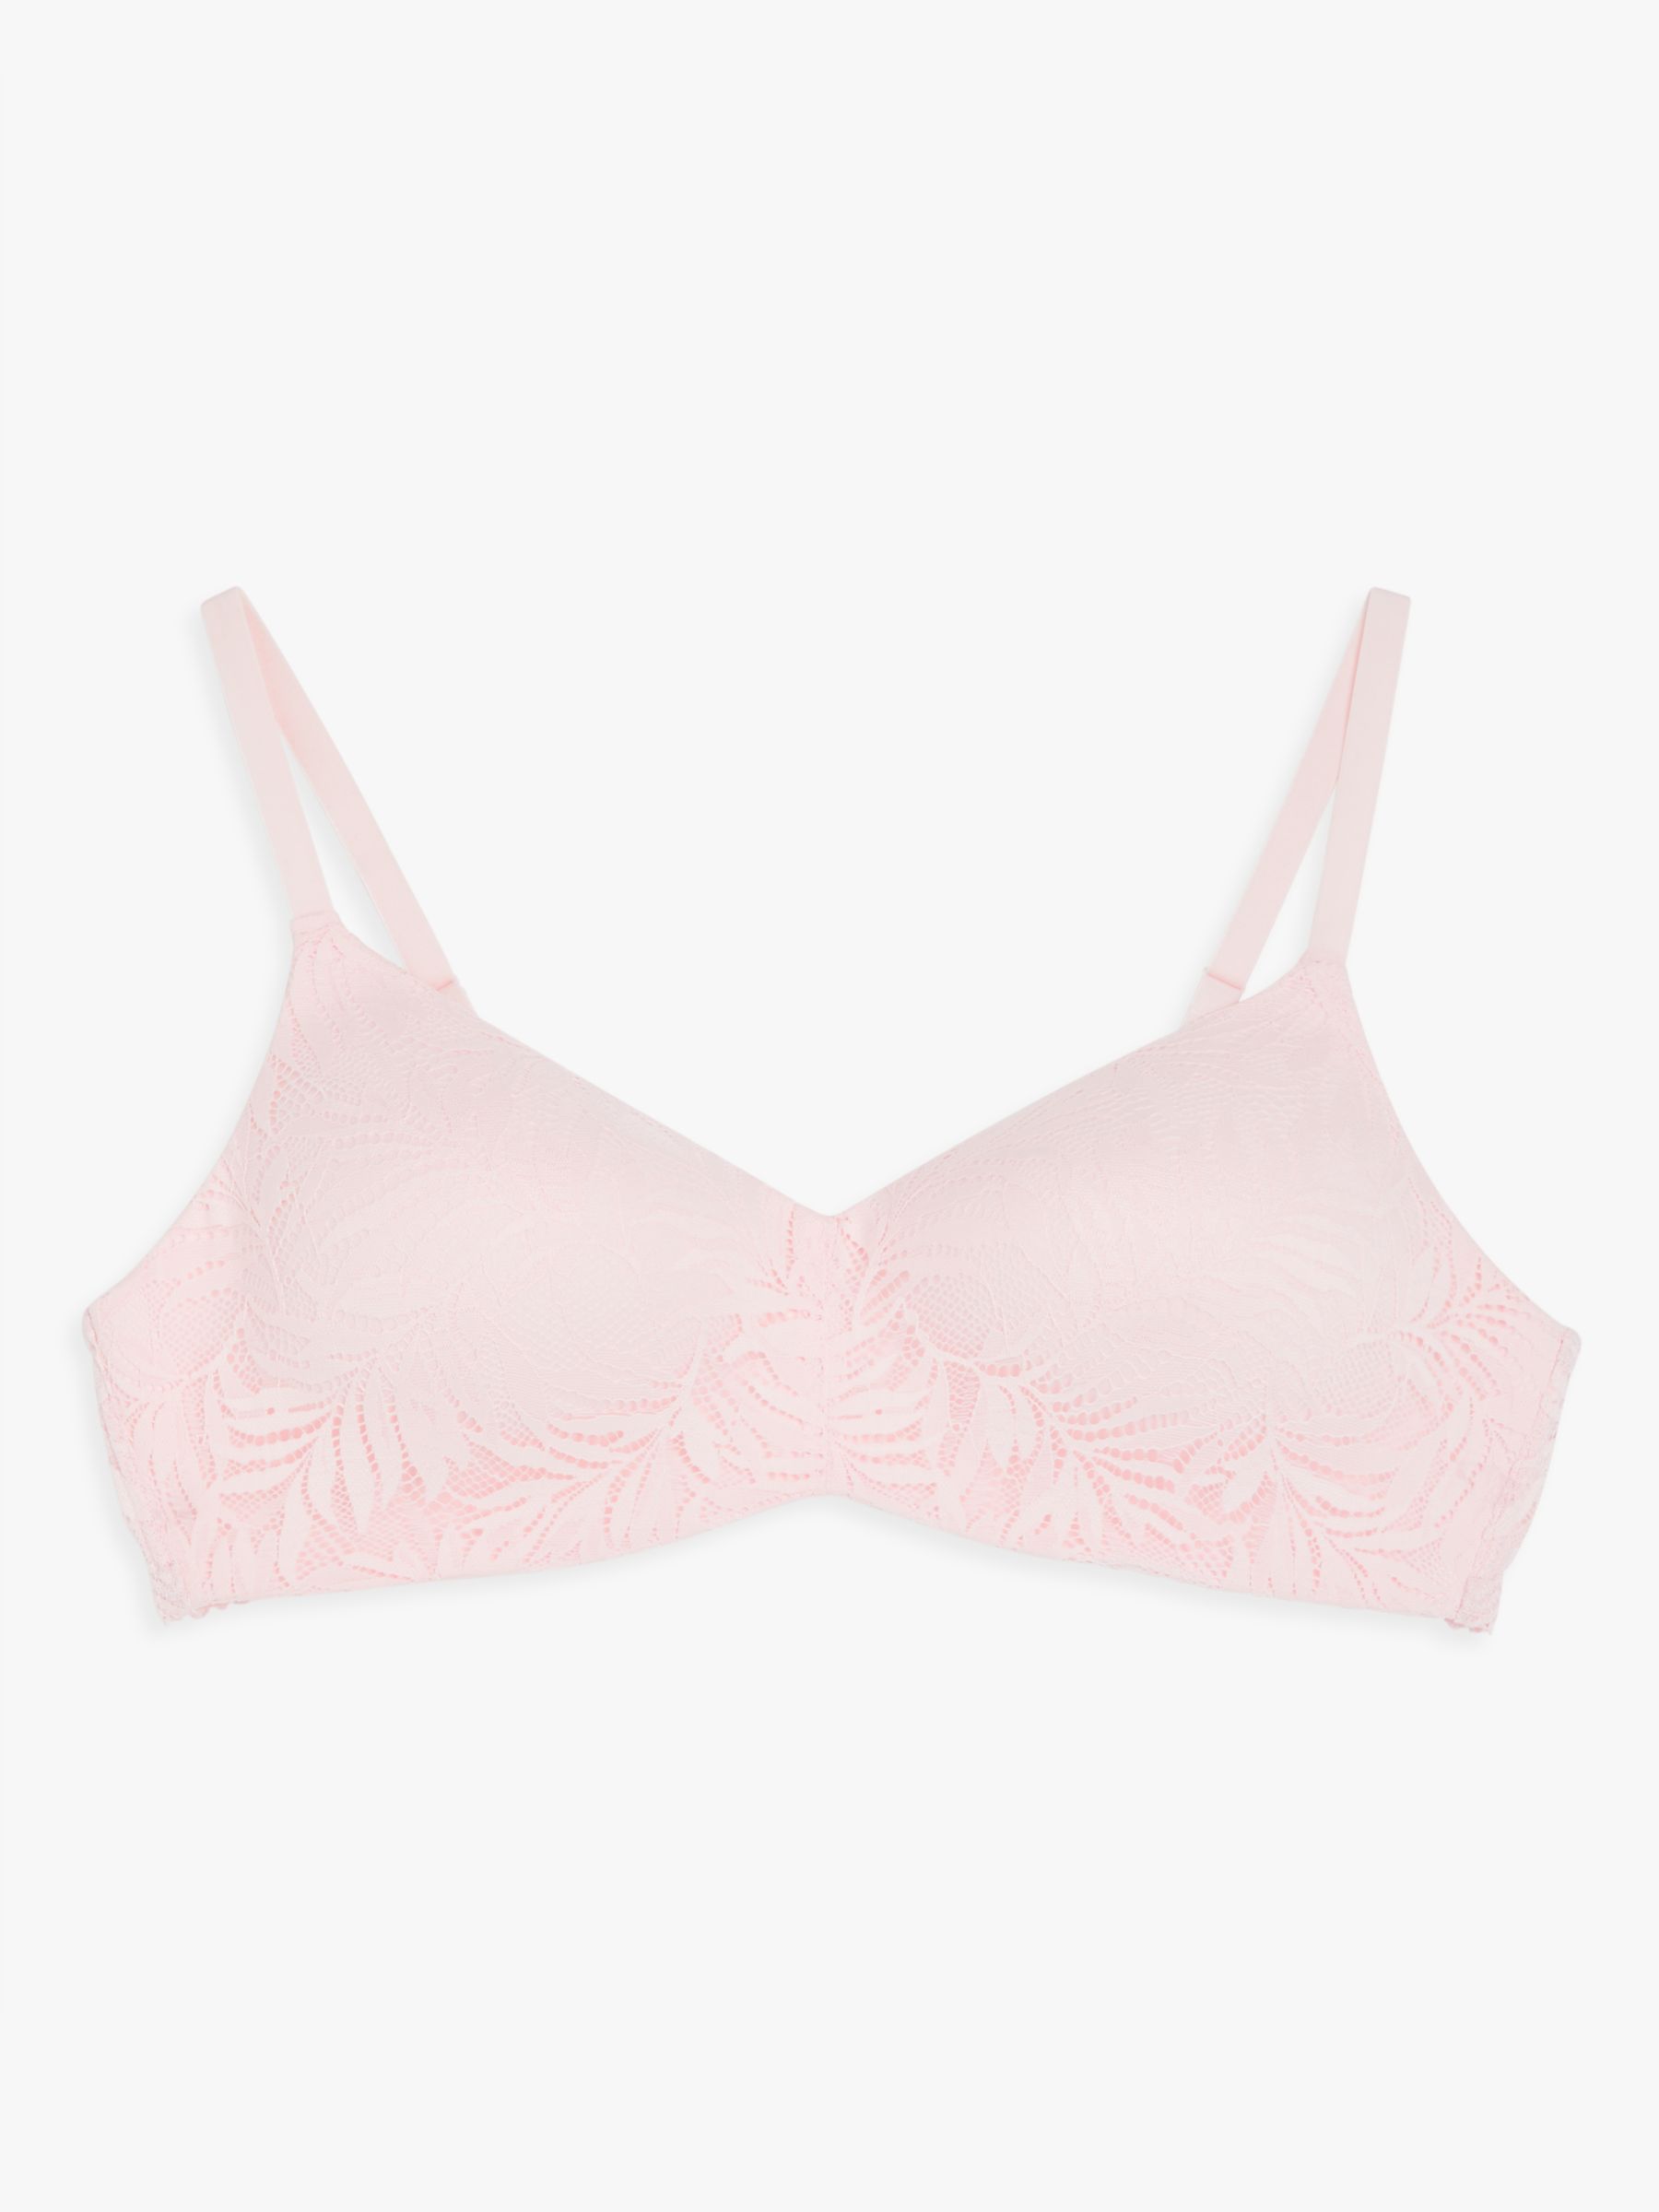 John Lewis ANYDAY Avery Non-Wired Lace Bra, Pink at John Lewis & Partners